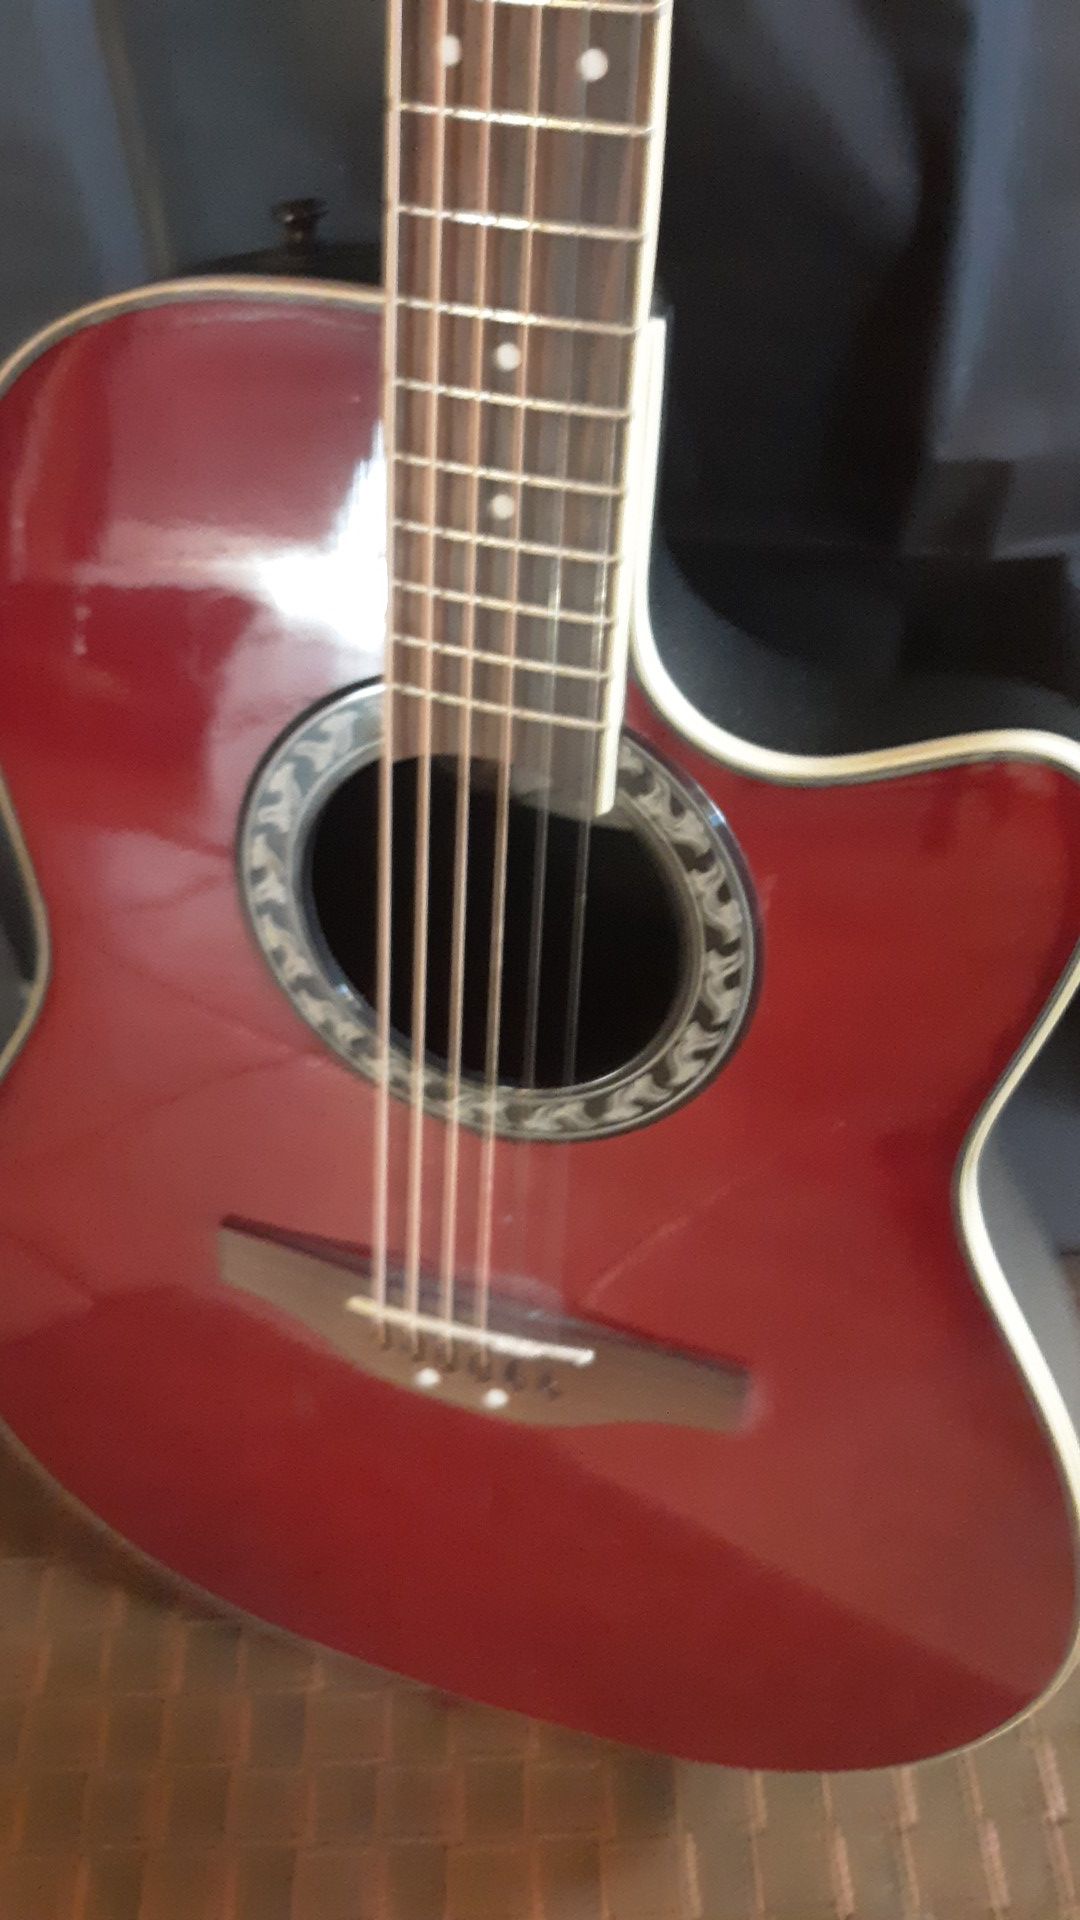 Acoustic Electric 6 String Guitar- Applause ae128 Cherry Red